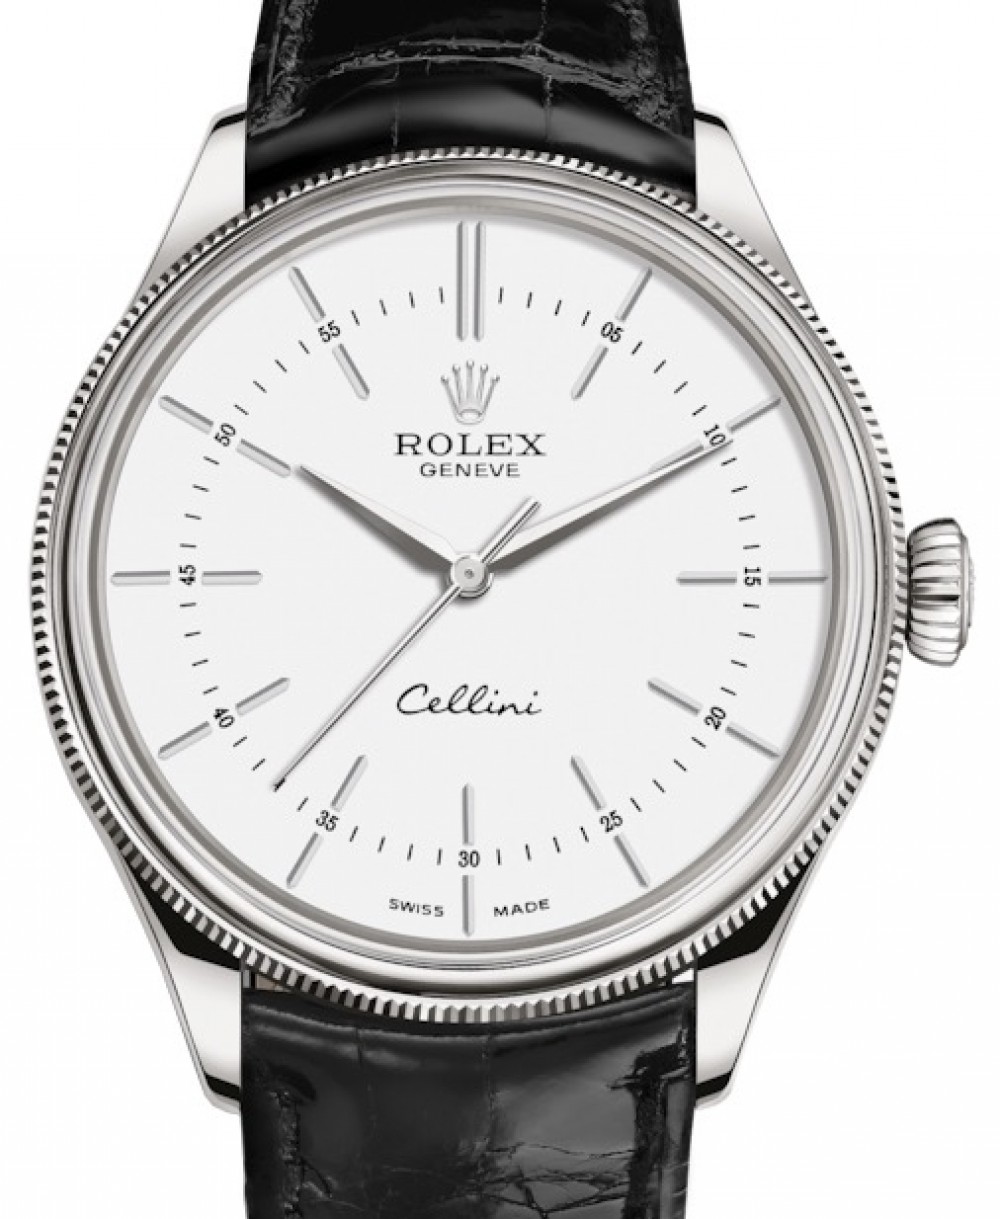 Rolex Cellini Time White Gold White Index Dial Domed & Fluted Double Bezel  Black Leather Bracelet 50509 - BRAND NEW